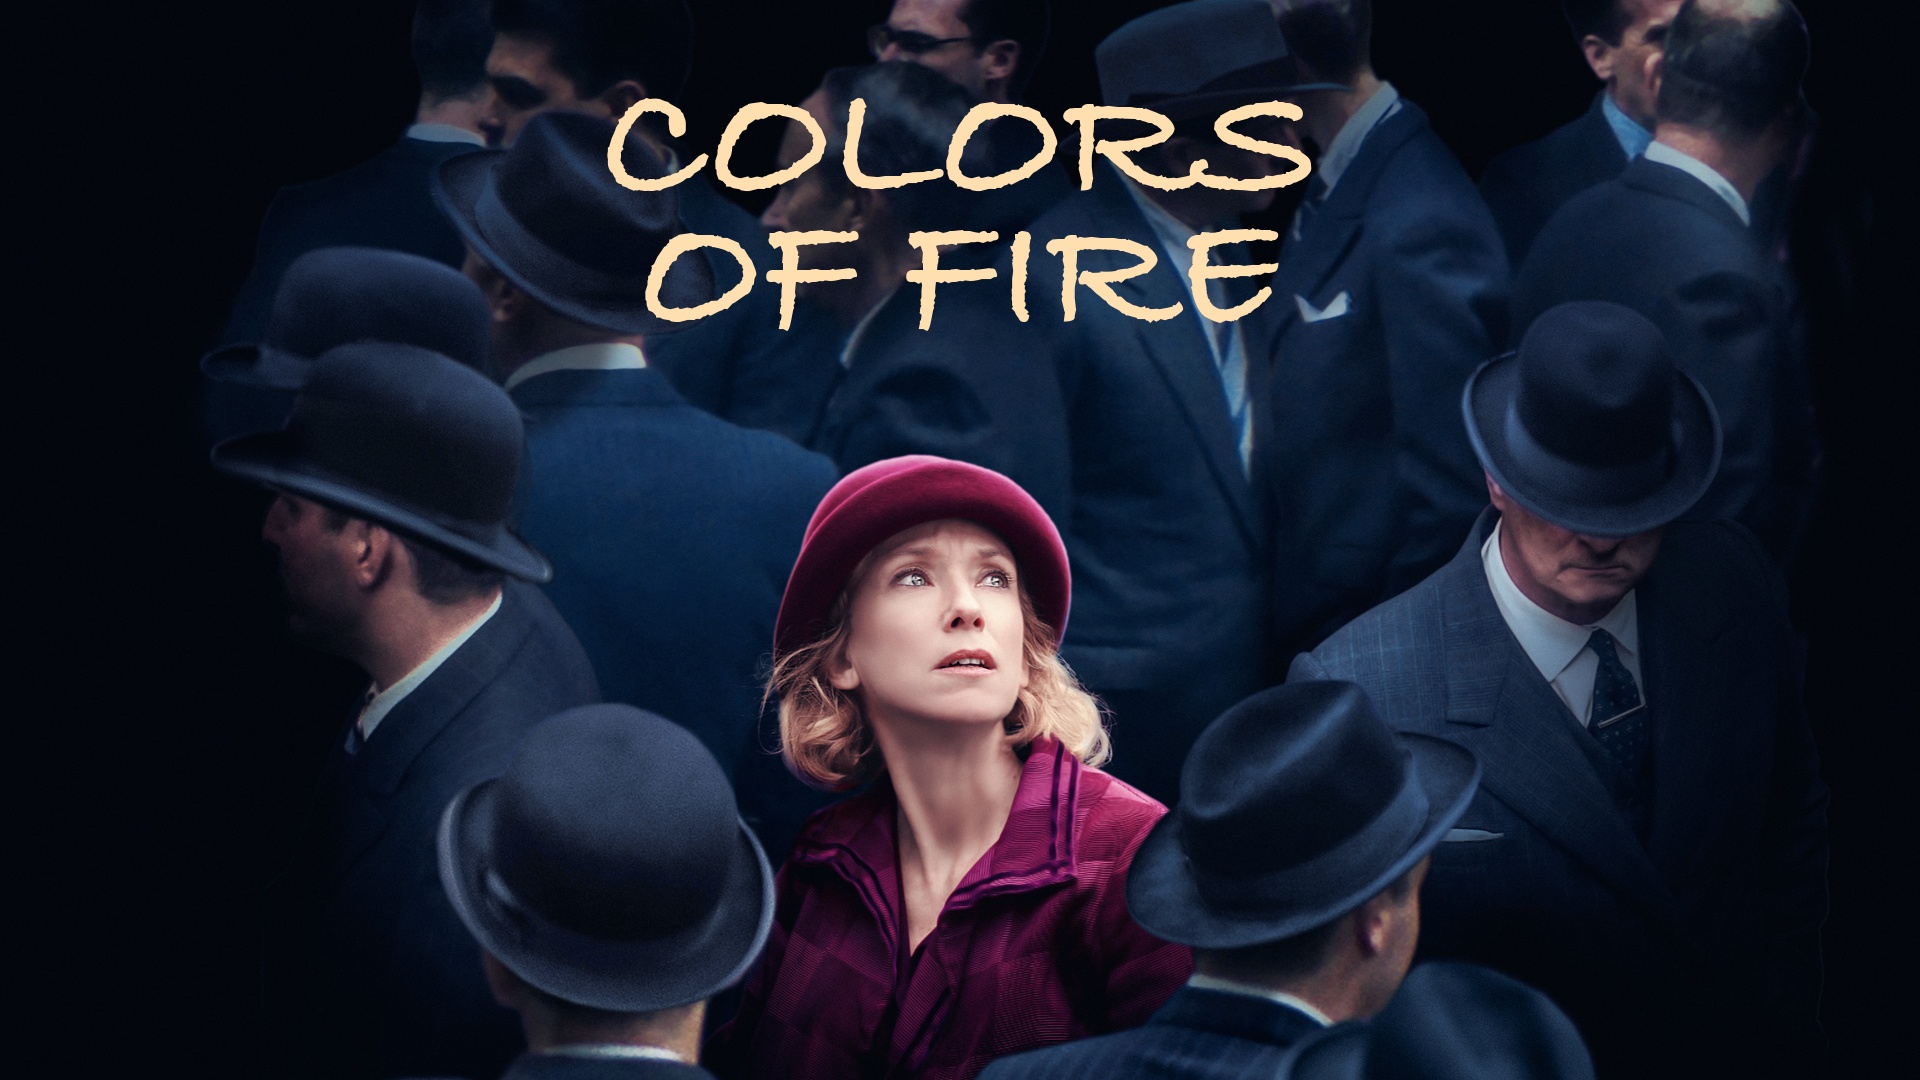 The Colors of Fire (2022) Google Drive Download